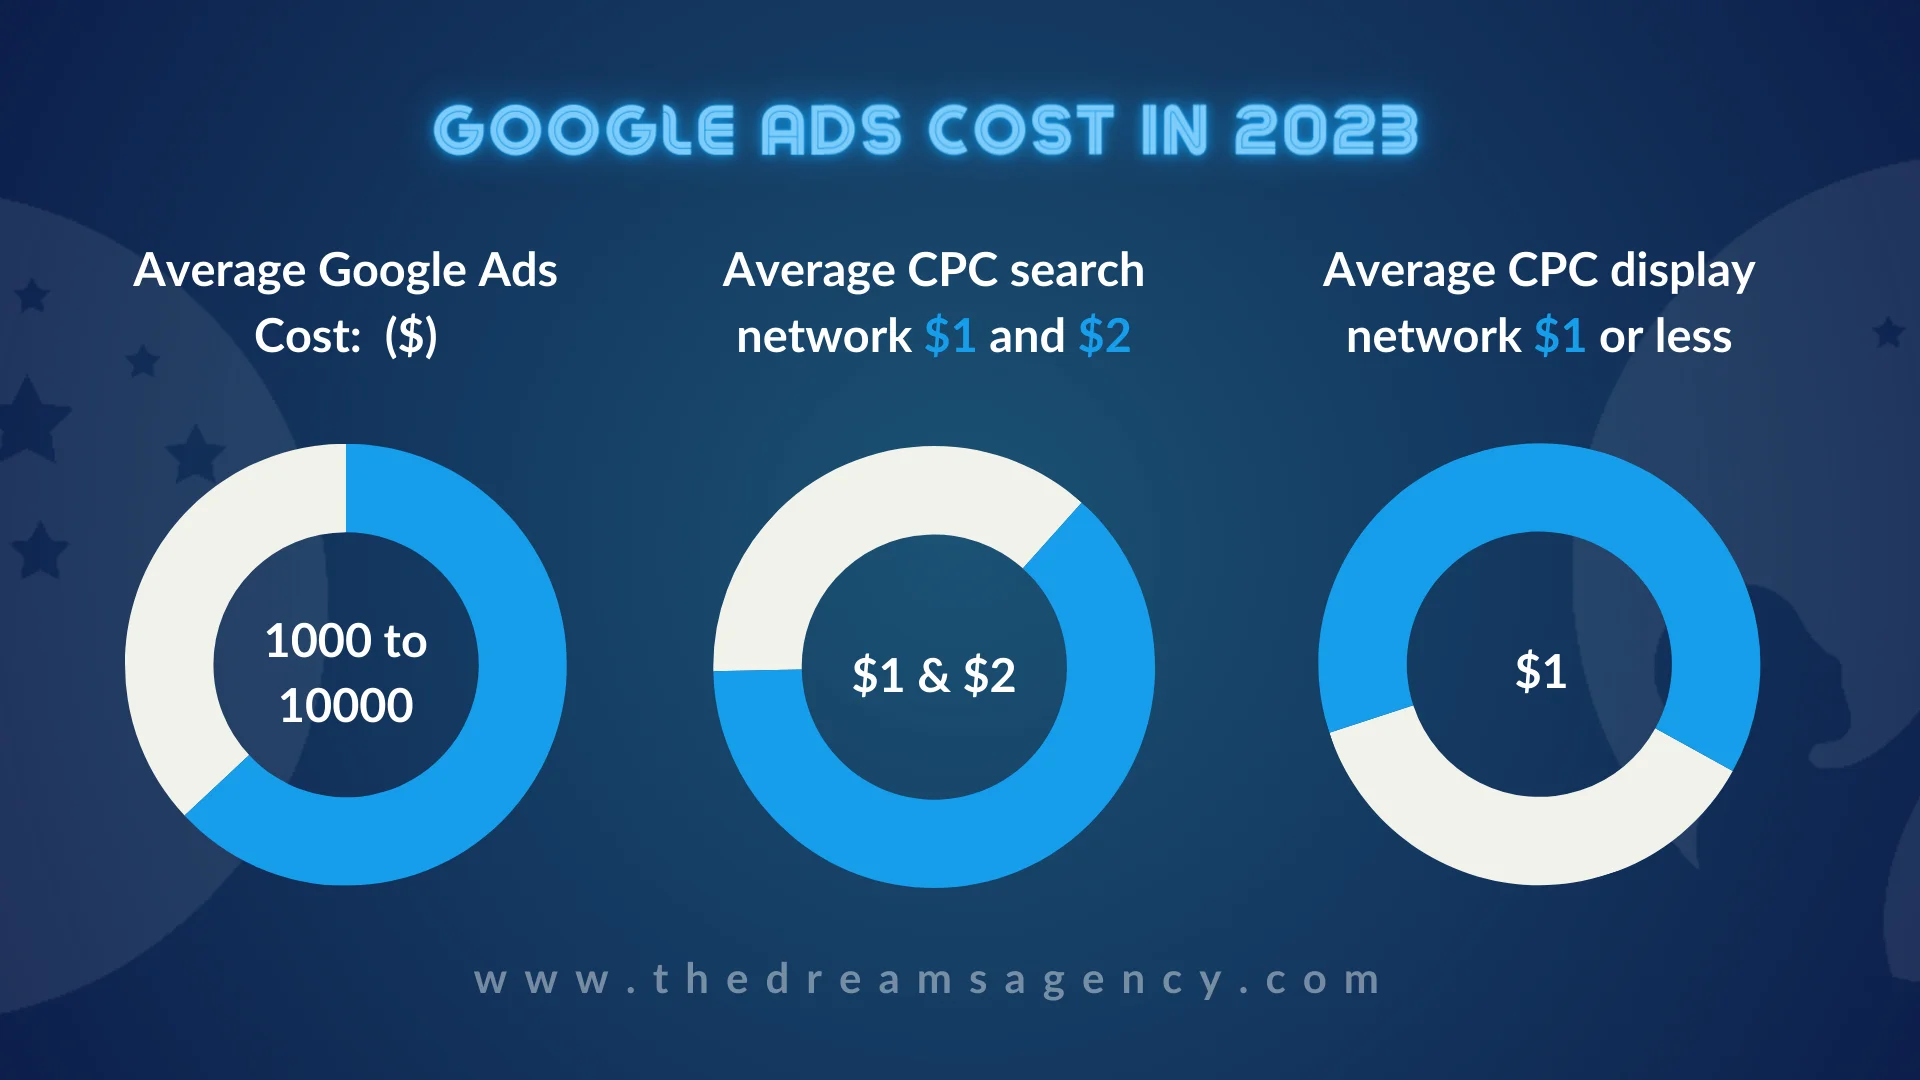 An infographic about Google ads cost in 2023